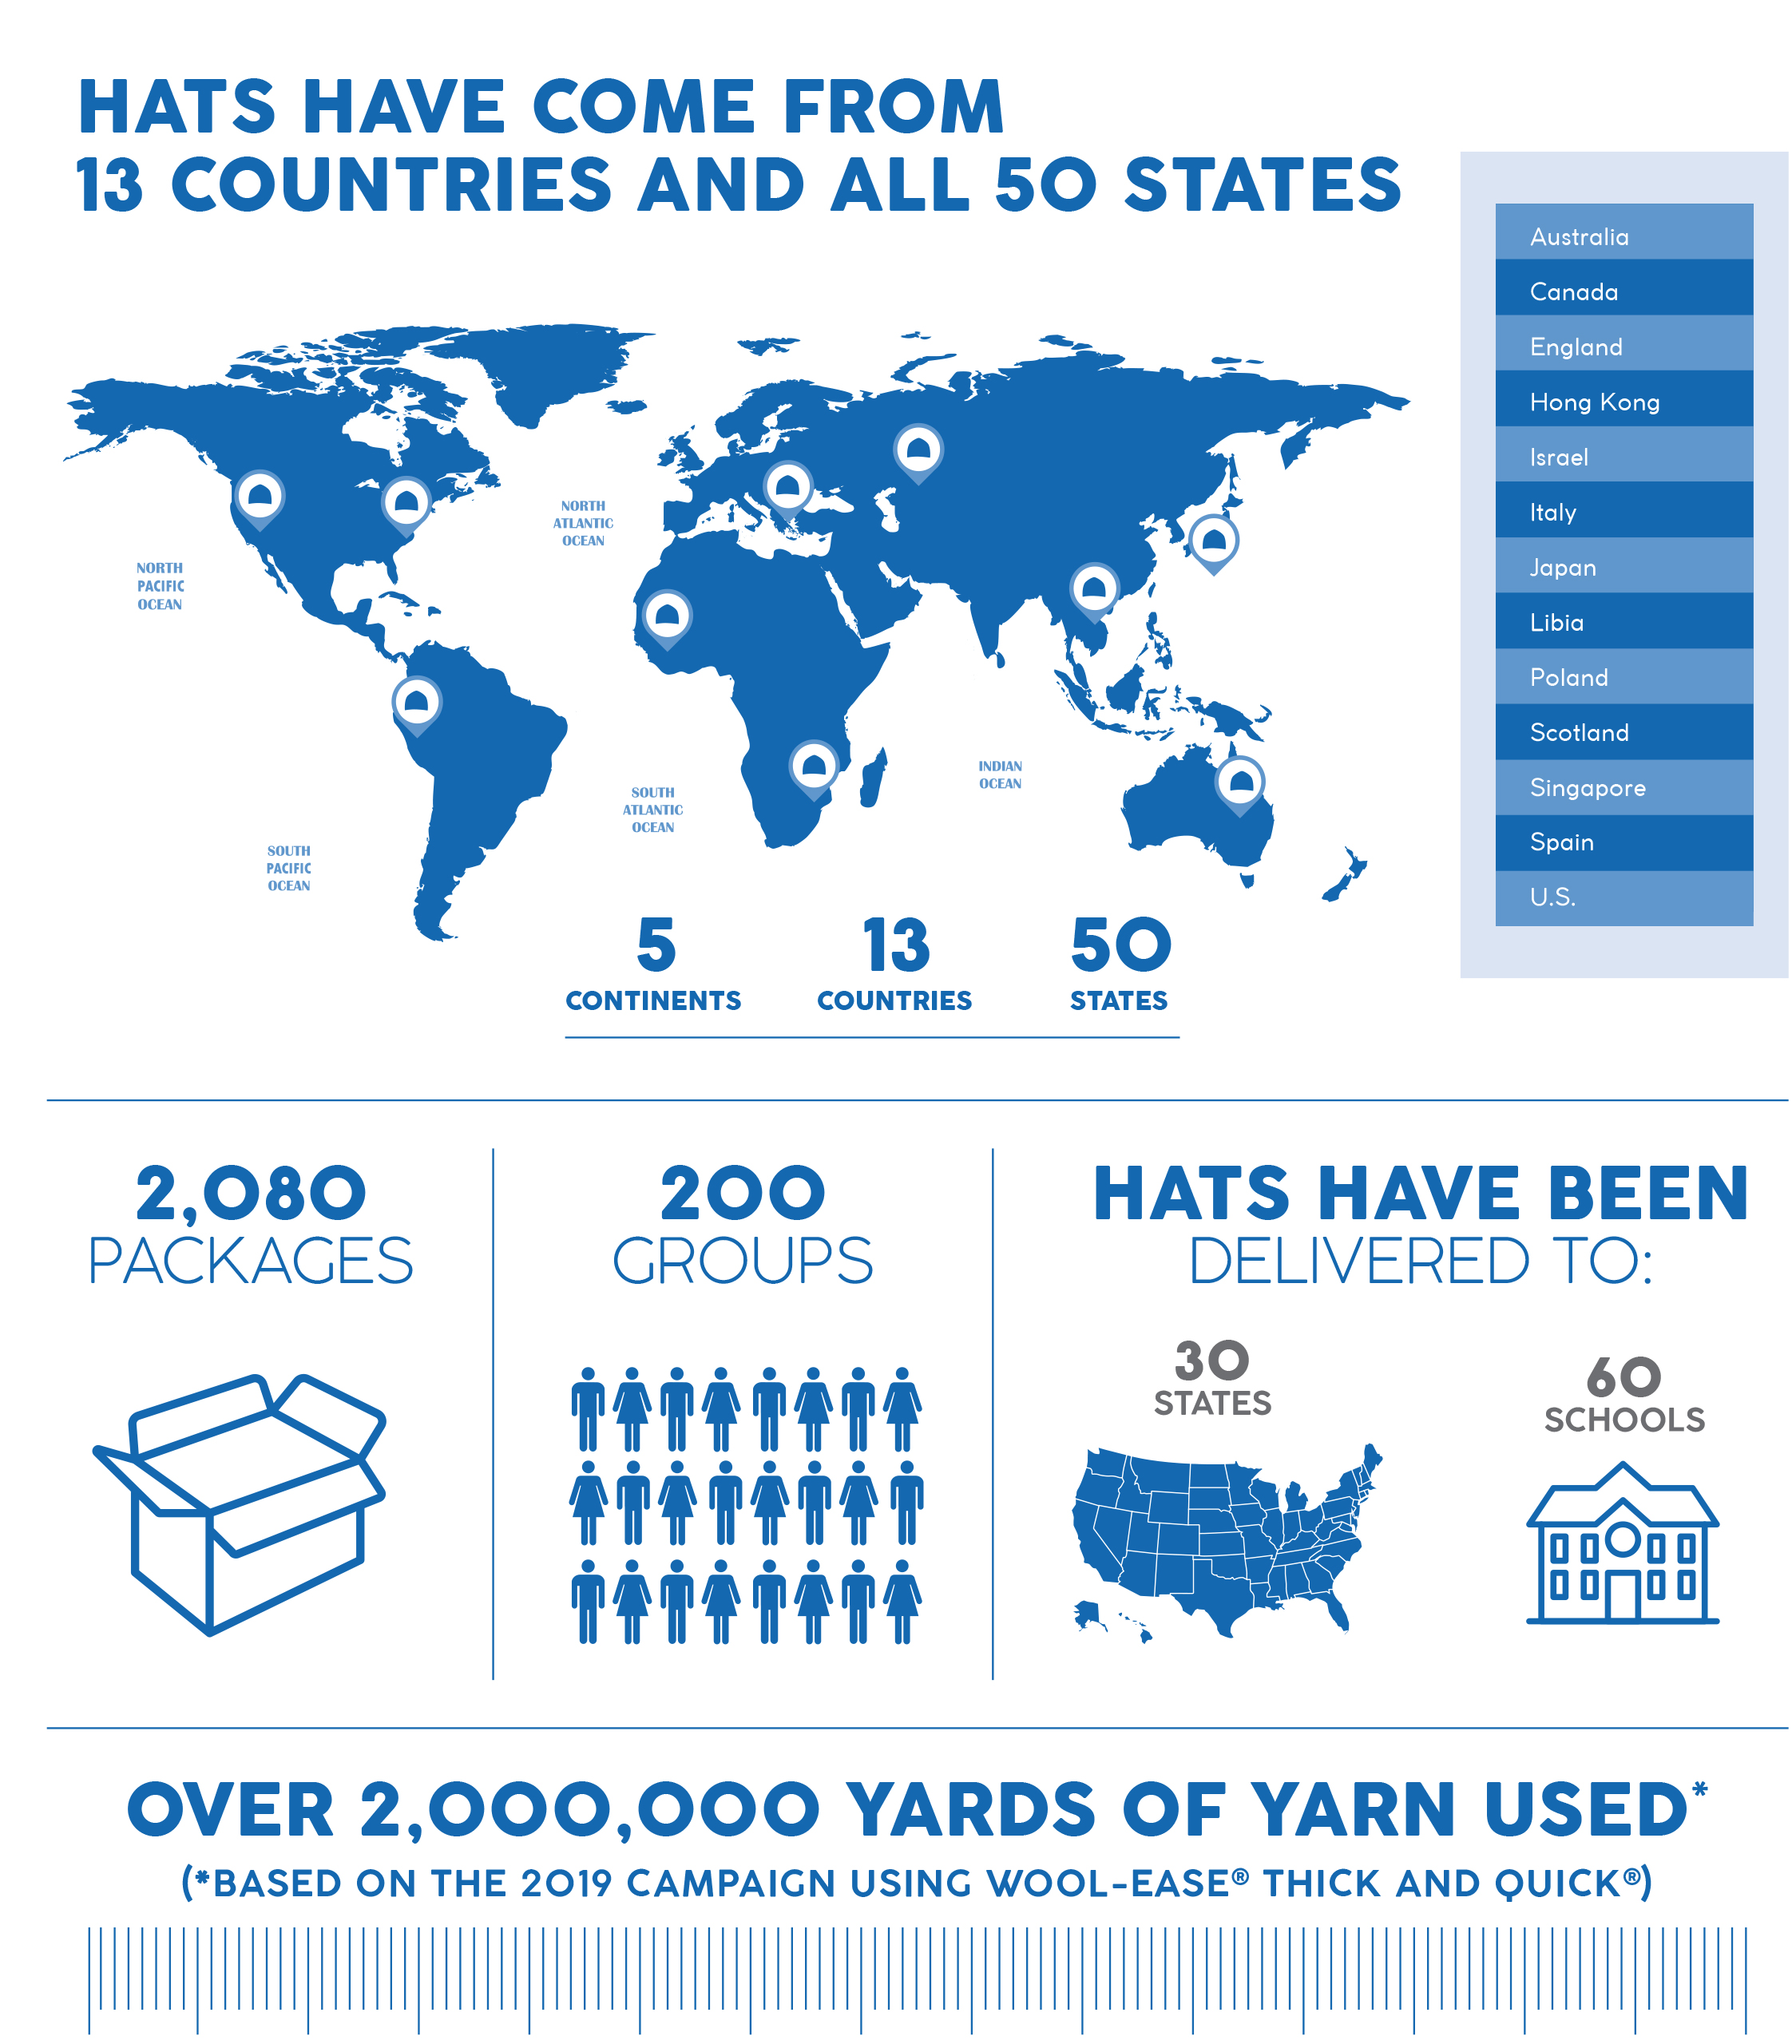 infographic: hats from 13 countries, 2,080 packages, 200 groups, hats delivered to 30 states & 60 schools, over 2 million yards of yarn used